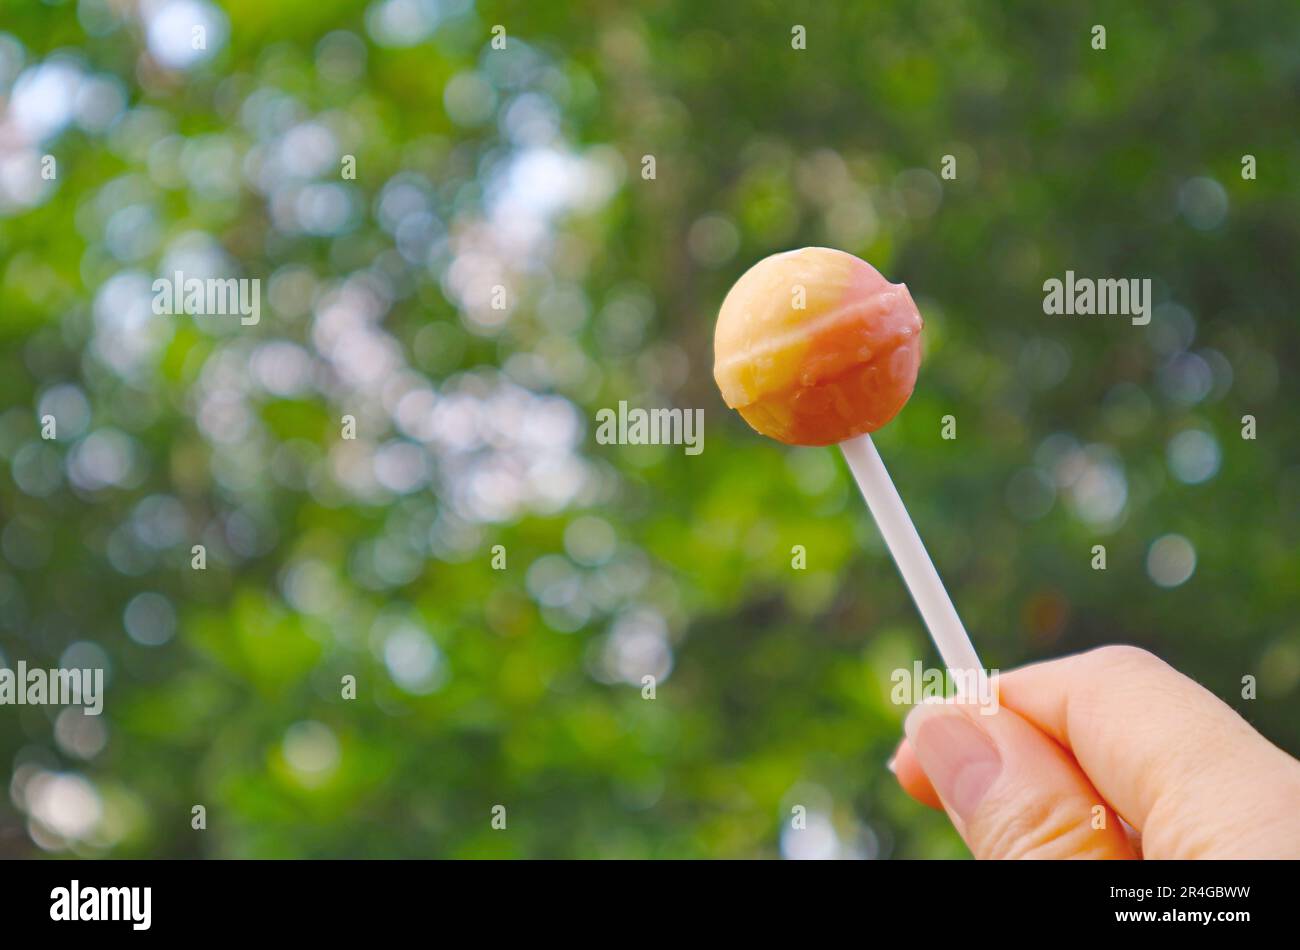 Hand Holding an Orange and Lemon Lollipop Candy against Green Foliage Stock Photo